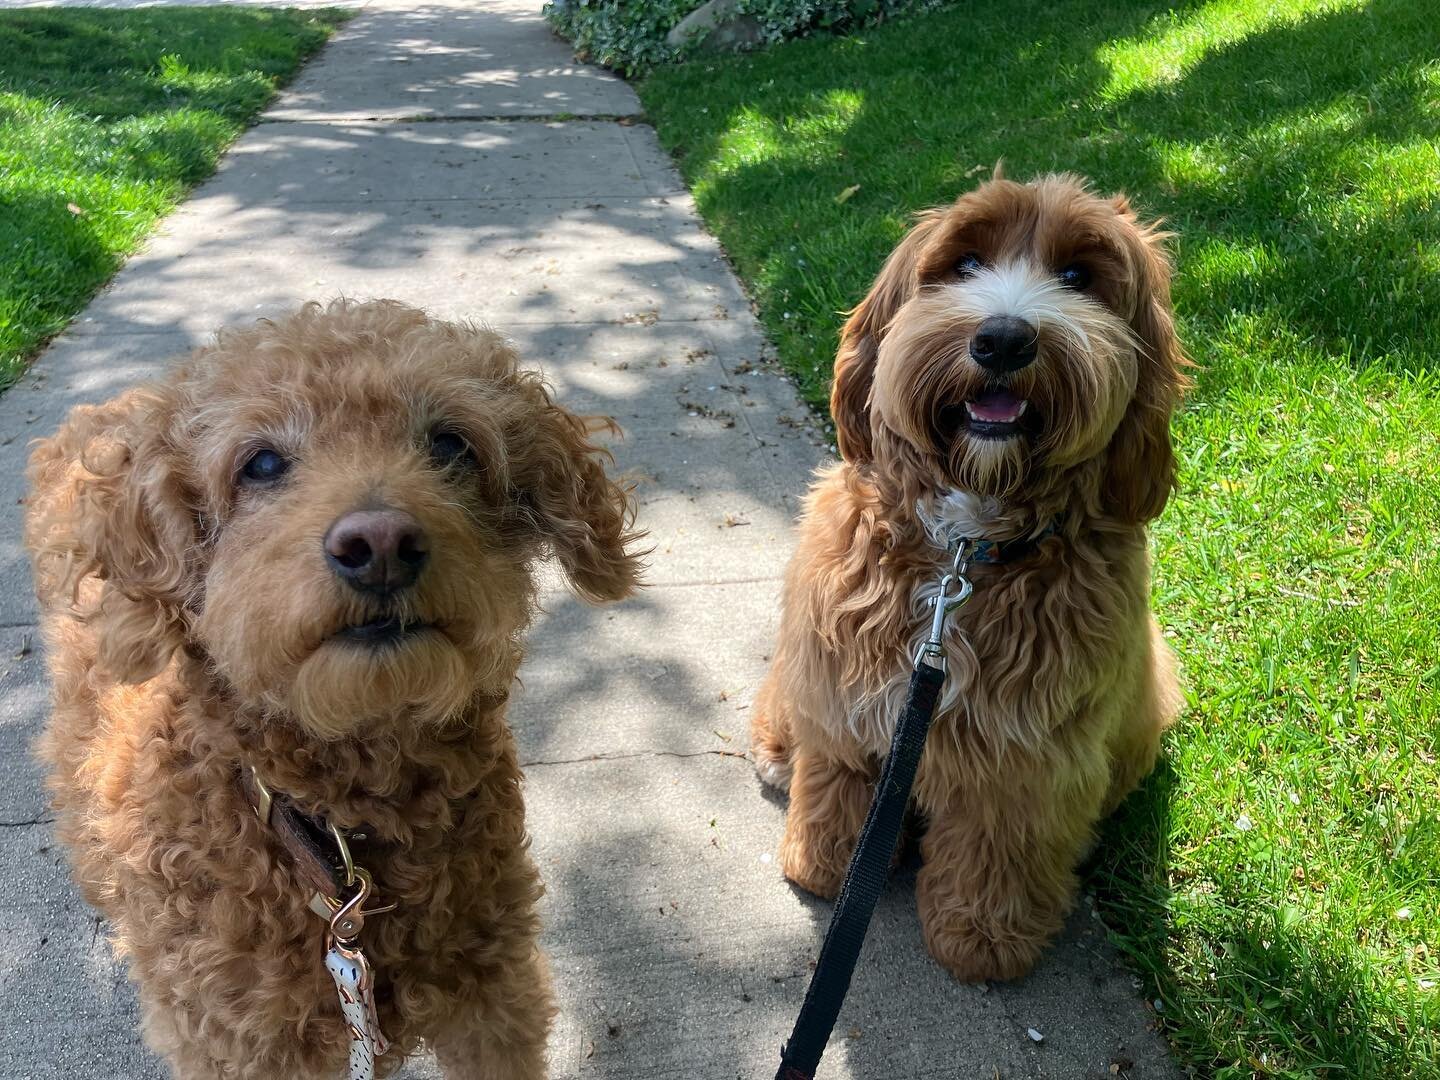 Ellie helped us welcome our new friend Teddy to our mid day pack this week. Ted is only 8 months old and a little nervous about new experiences. Thankfully Ellie and Sam were here to give him a warm welcome and he was coming out his shell in no time!